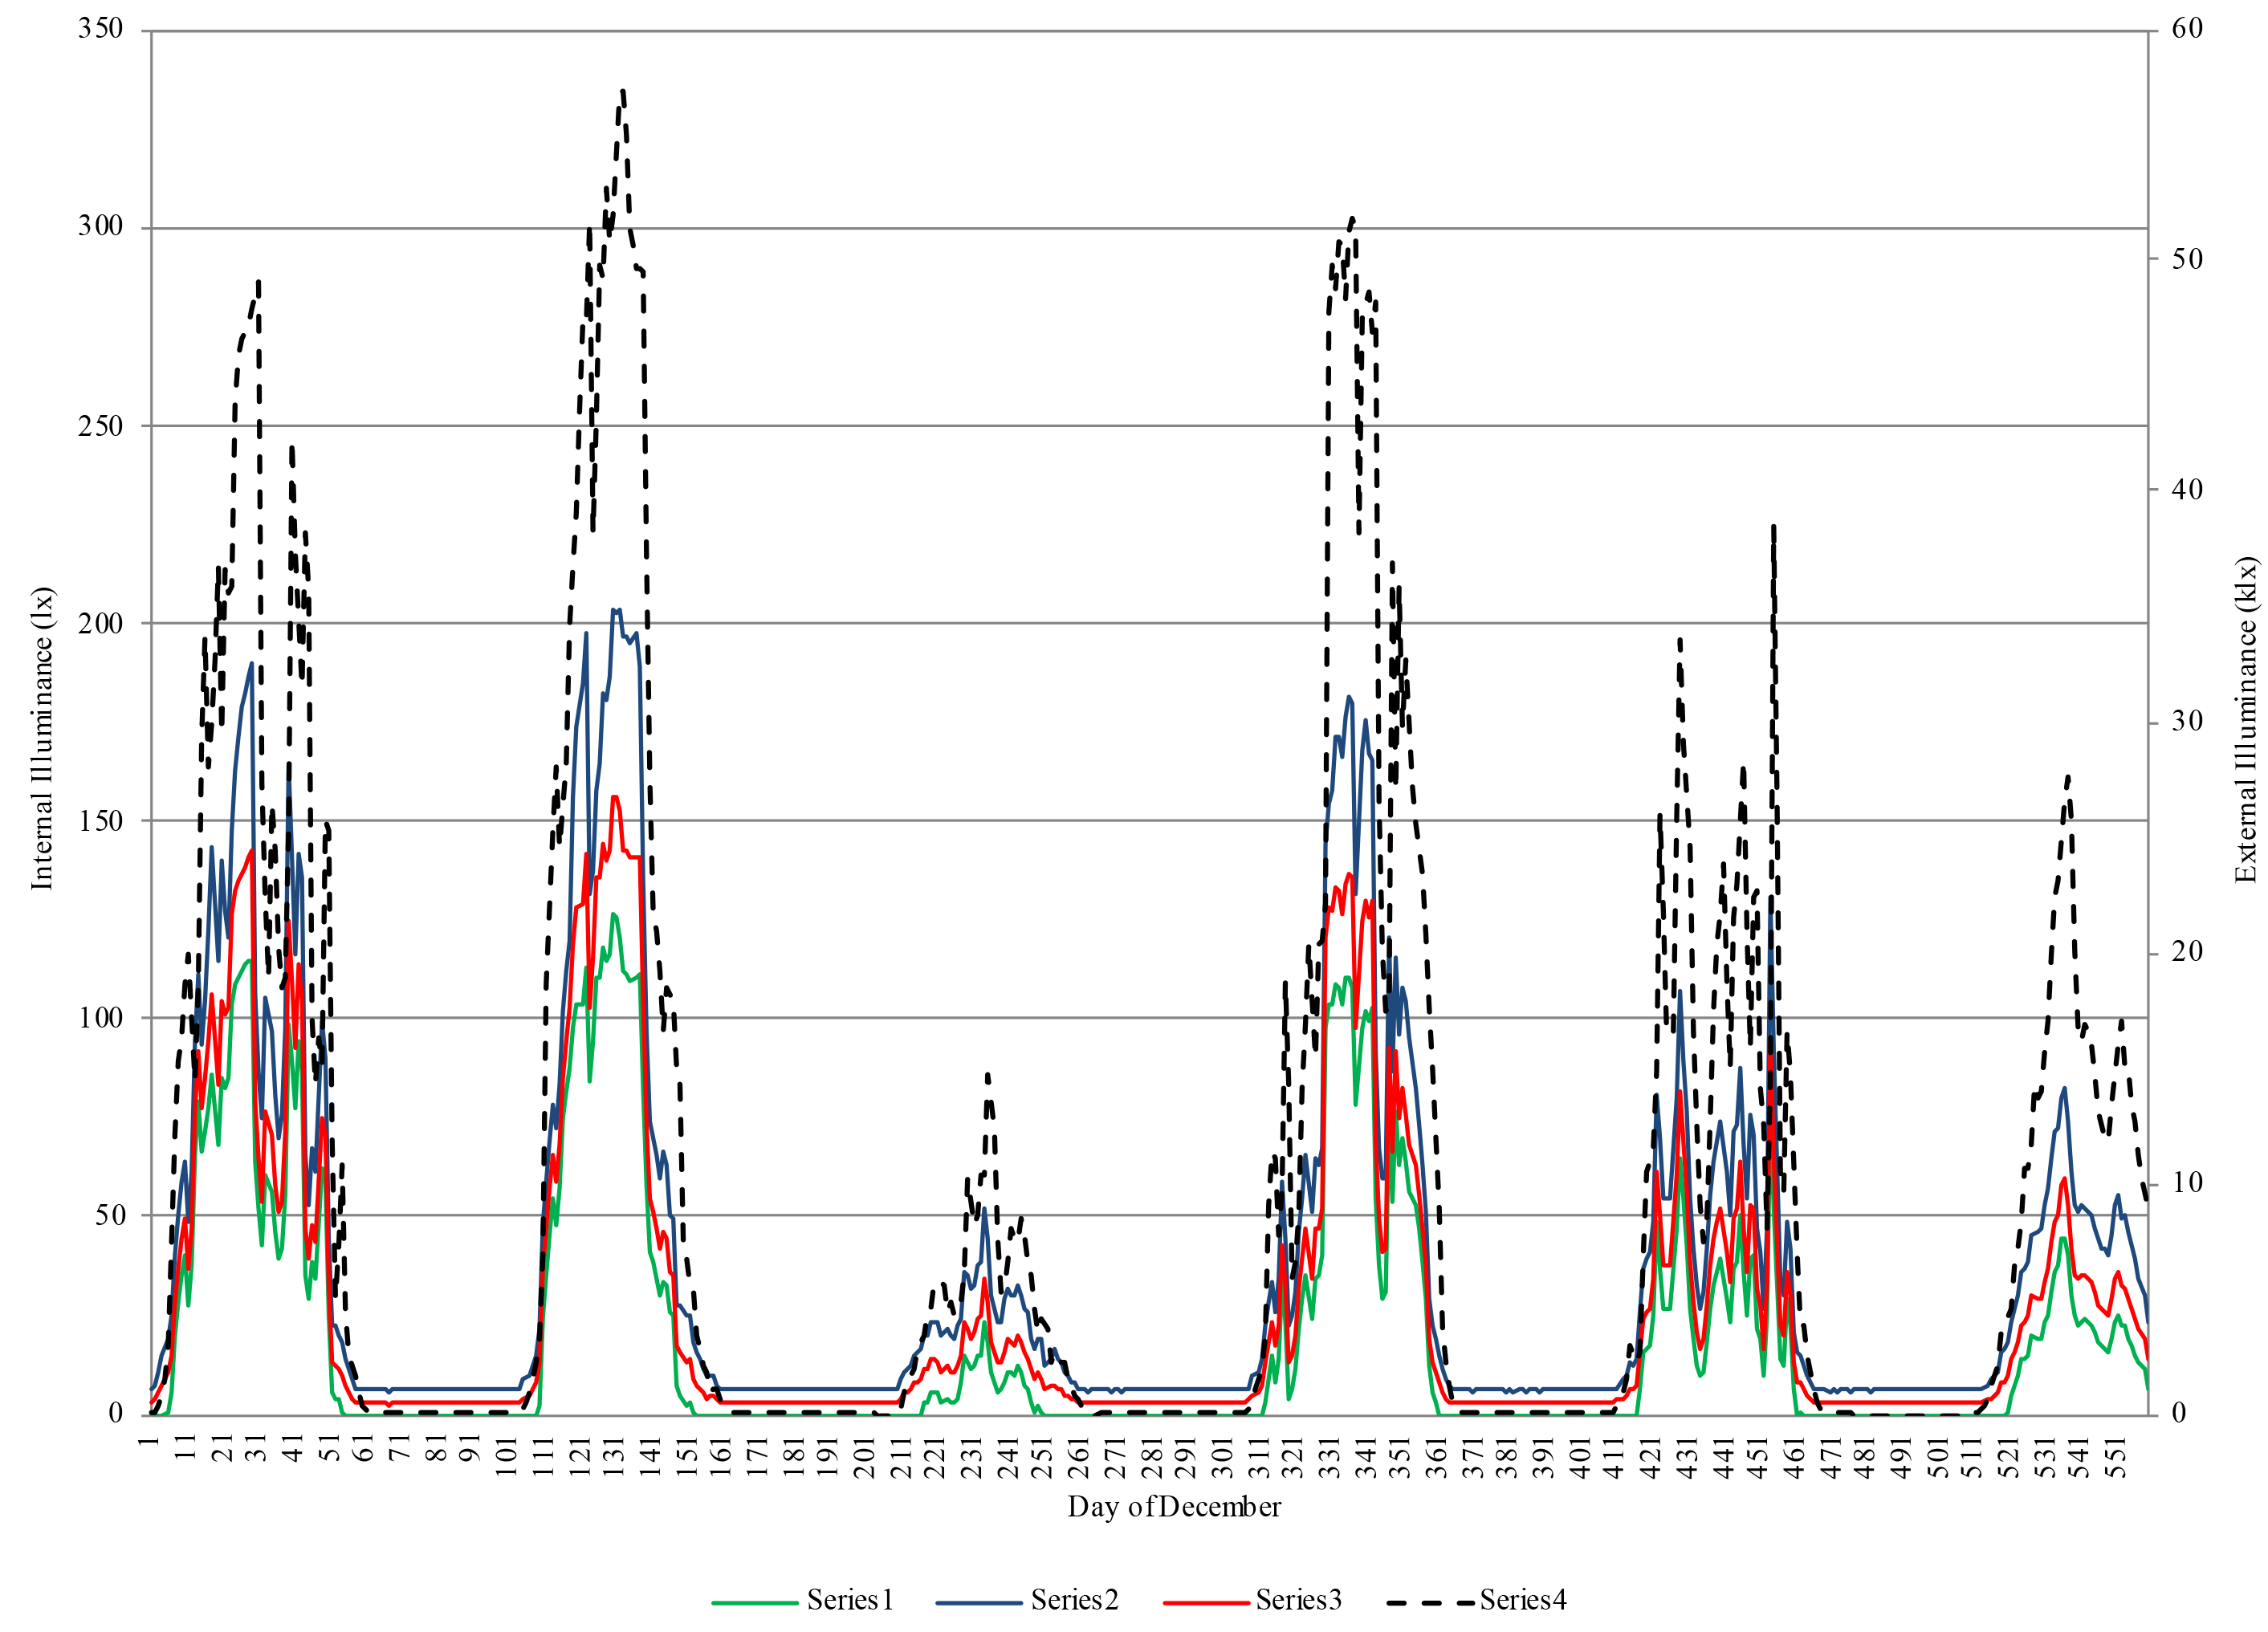 Illuminance data of a typical week (4-9 December) – External illuminance referred to the right axis.